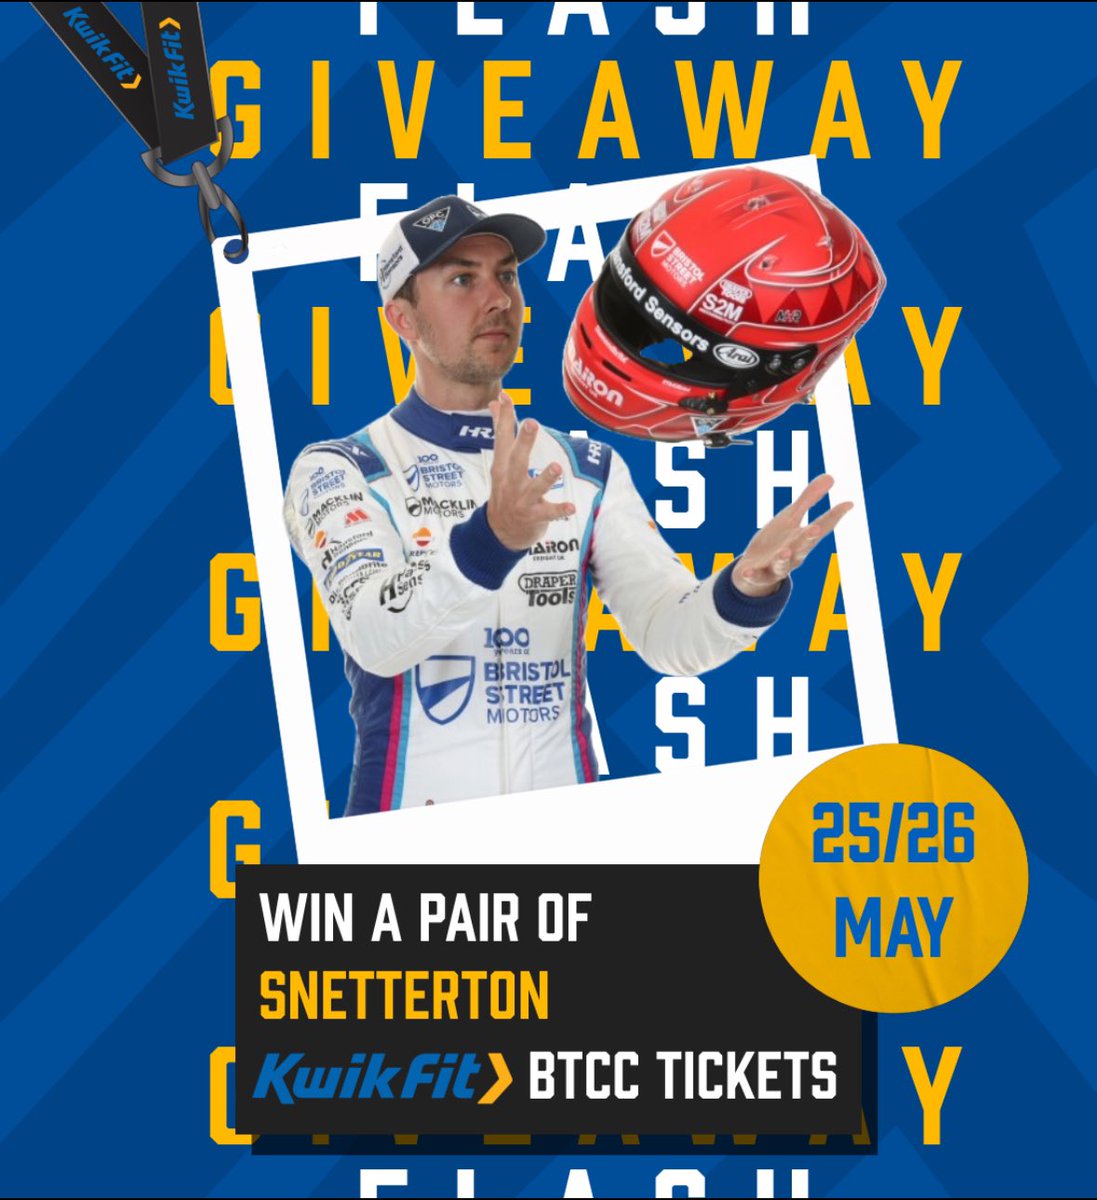 ⭐️ 30HR FLASH TICKET COMPETITION ⭐️
 
Who wants to see the BTCC action live from Snetterton? Like, comment and tag who you would bring for a chance to win a pair of weekend tickets (25/26 May). Competition closes 5pm on Wednesday 15th May 2024. 
 
Good luck! 🤩